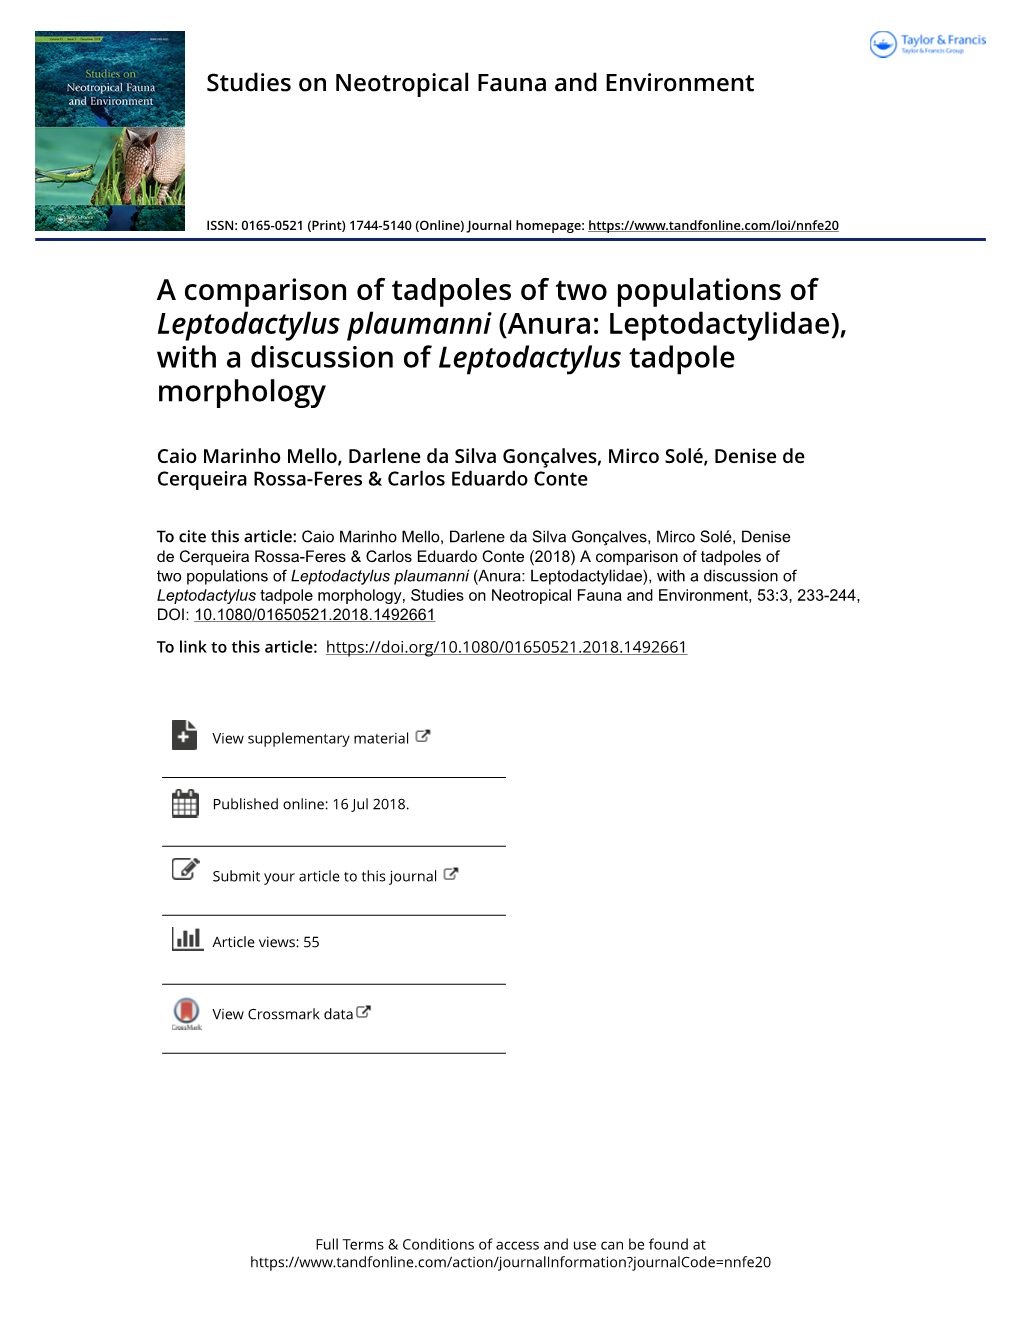 A Comparison of Tadpoles of Two Populations of Leptodactylus Plaumanni (Anura: Leptodactylidae), with a Discussion of Leptodactylus Tadpole Morphology